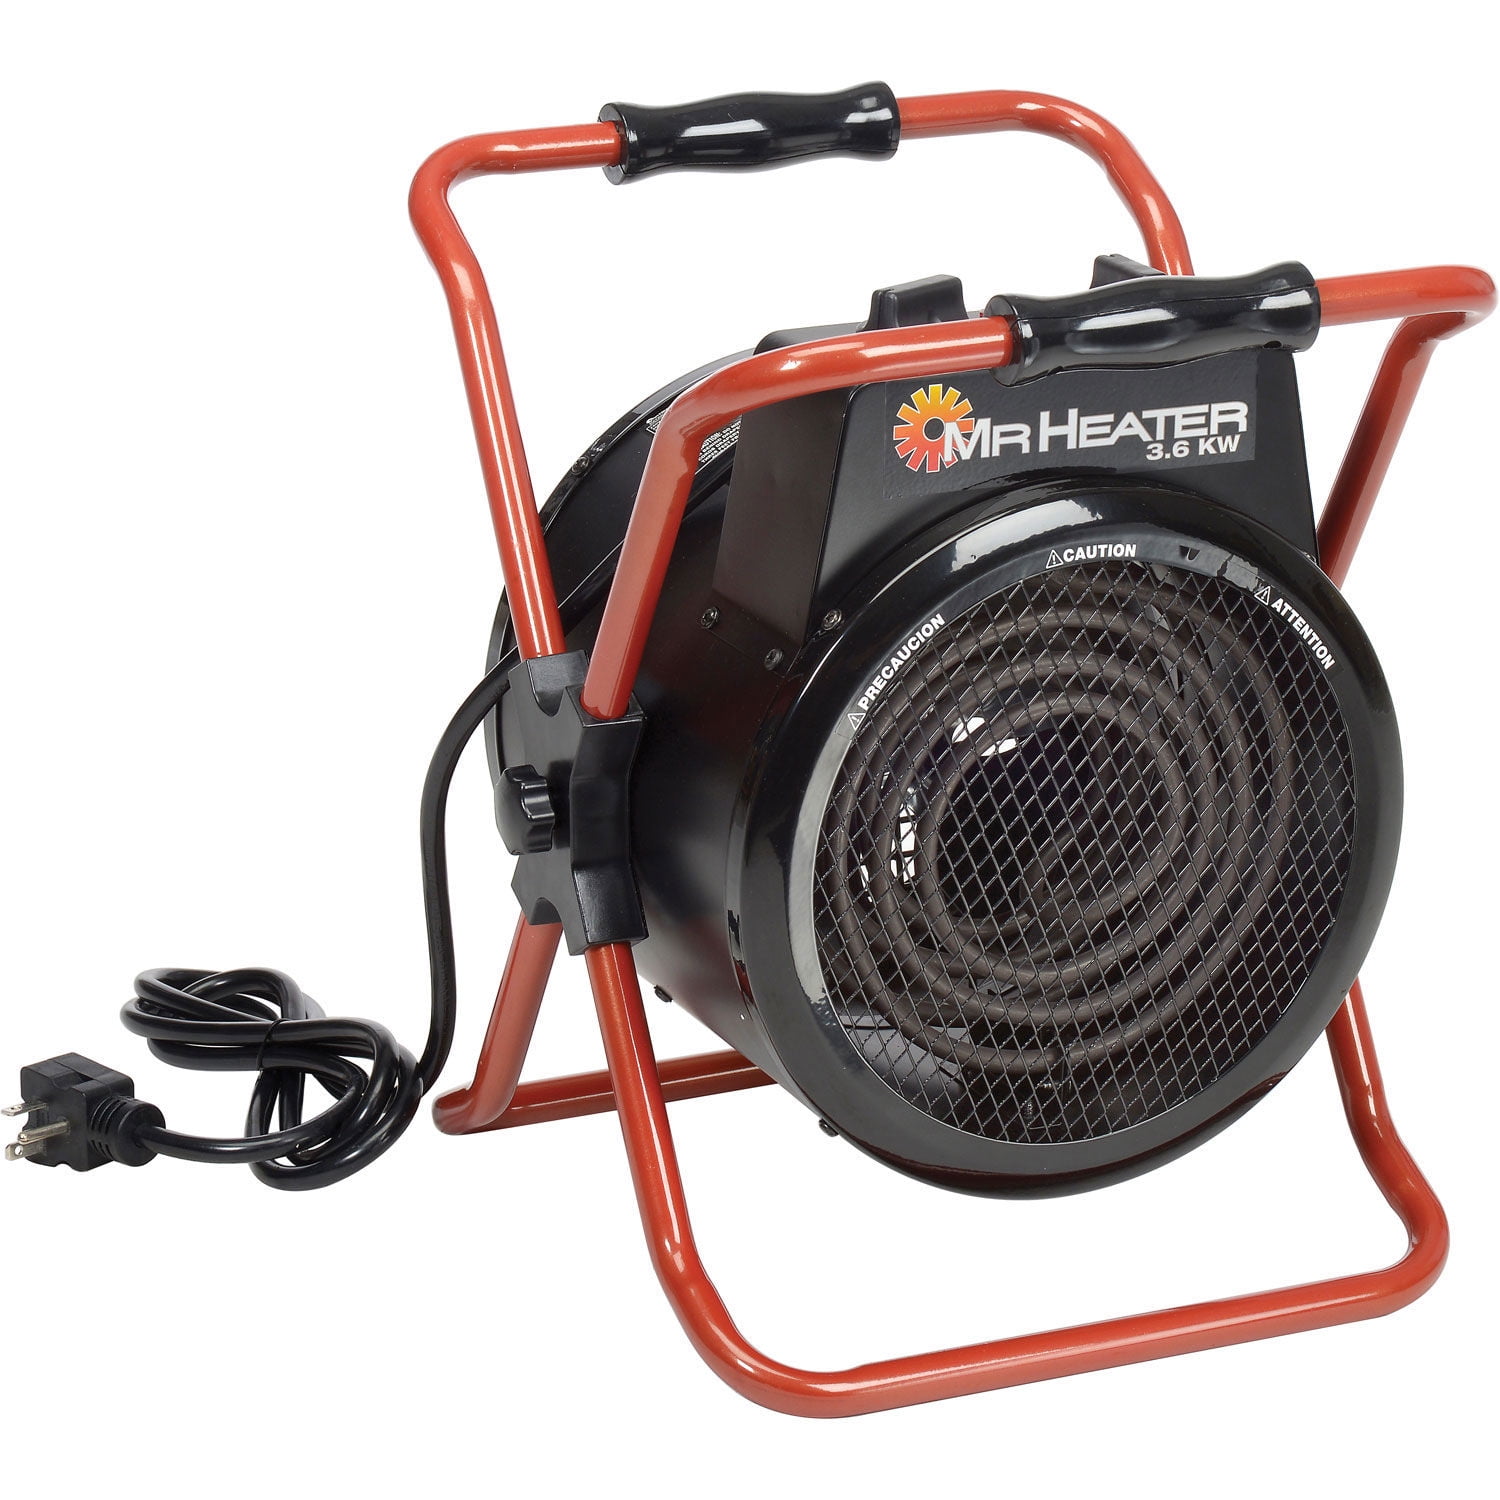 Mr. Heater F236125 3.6 KW Portable Forced Air Electric Heater - Walmart.com